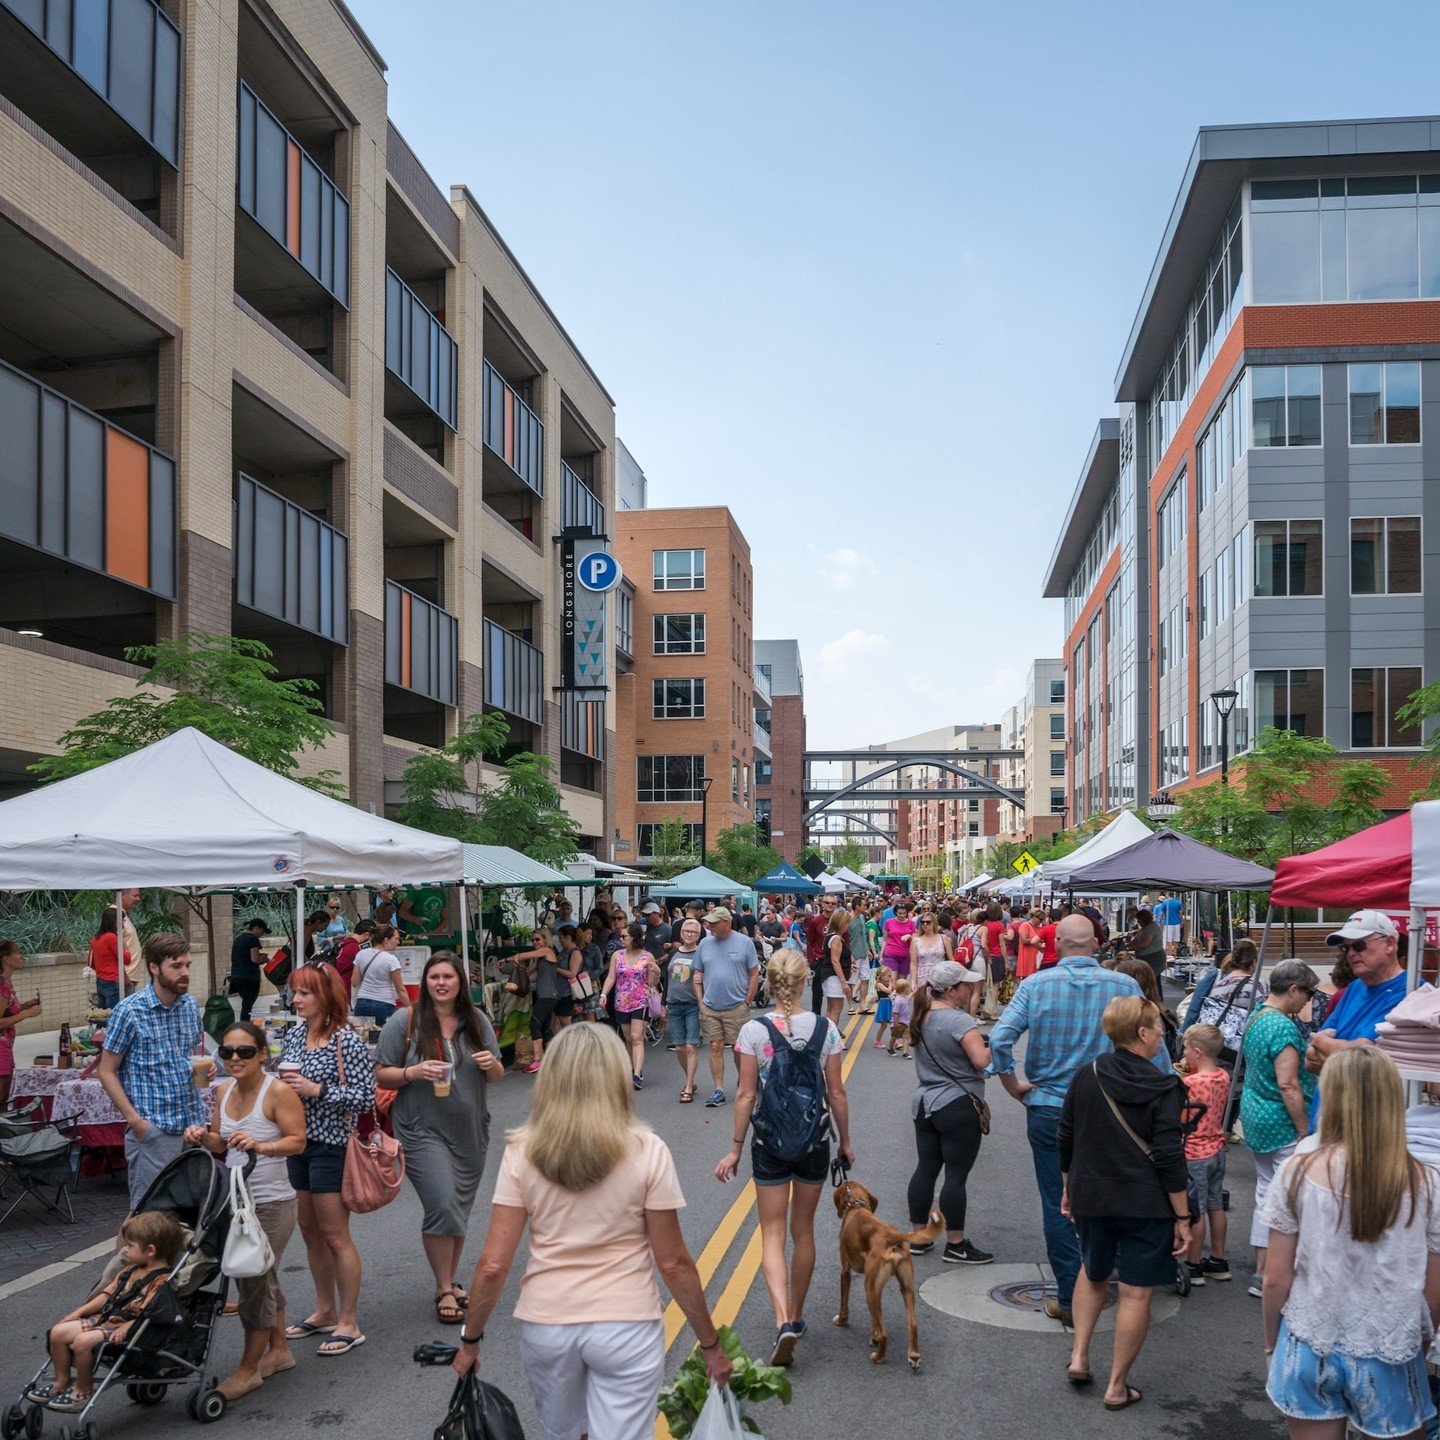 Creating community, one market at a time 🌱 @thedublinmarket returns to Bridge Park on Saturday, May 4 from 9am-noon every weekend through September.